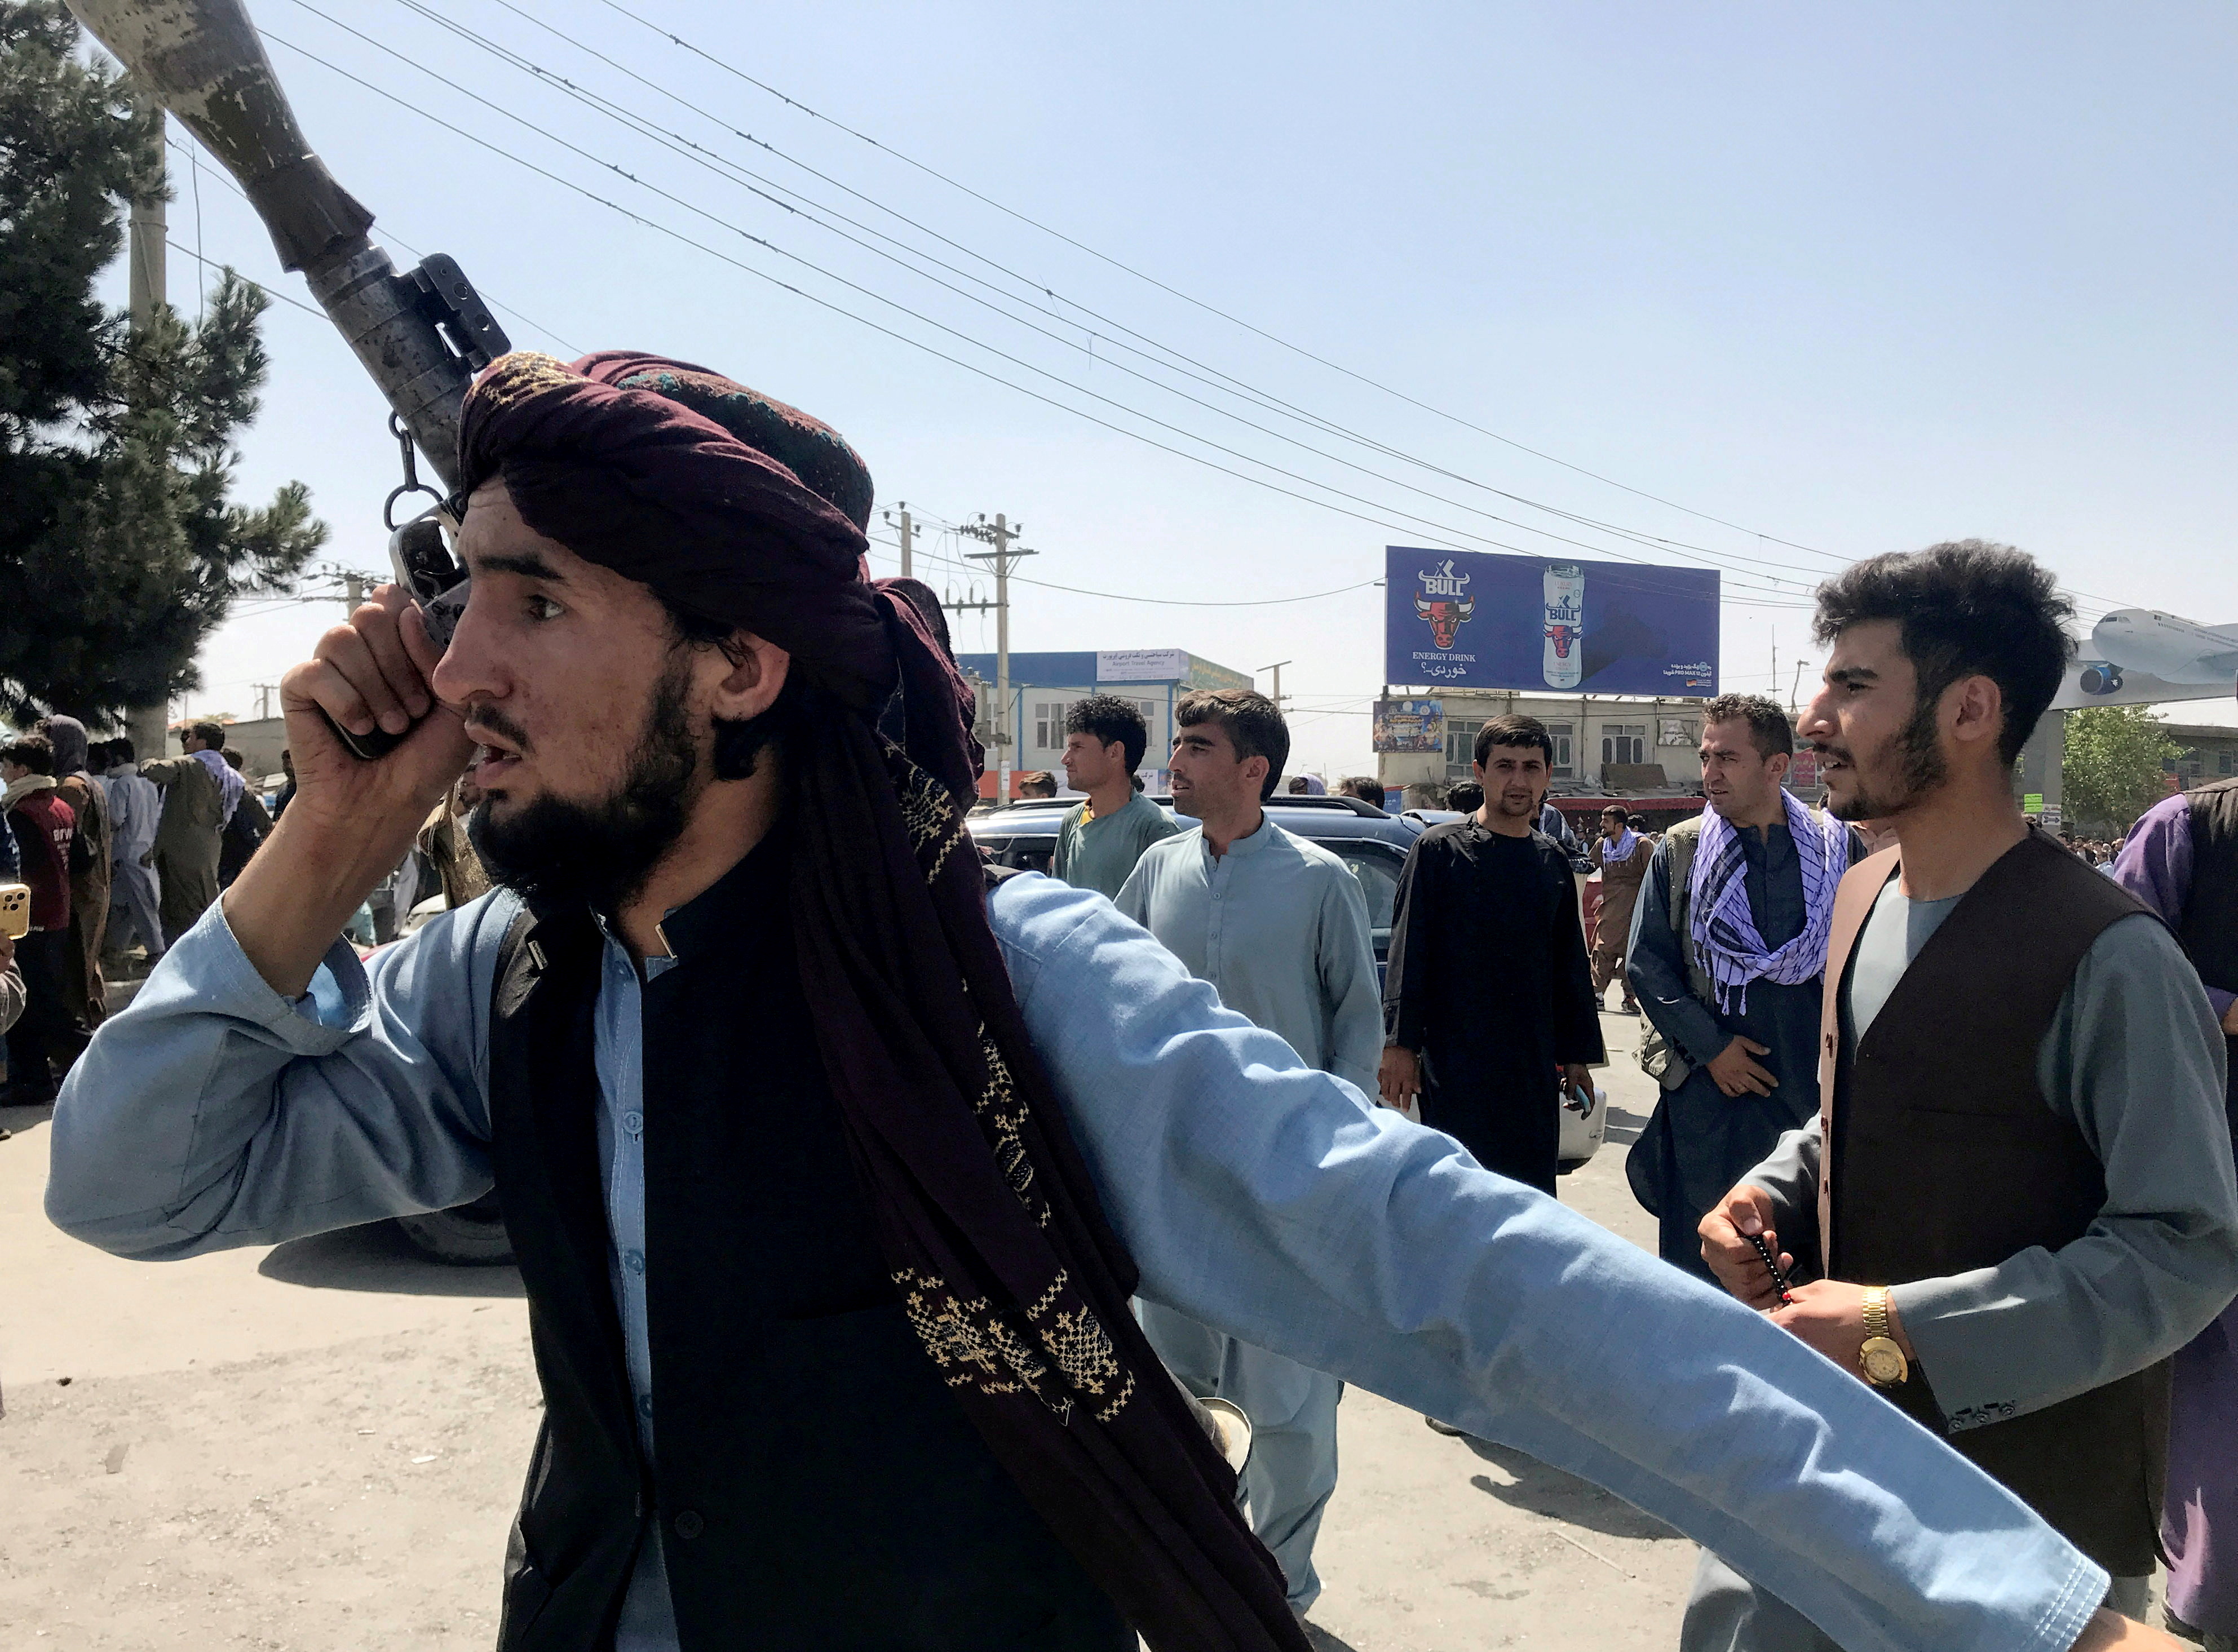 A member of Taliban forces inspects the area outside Hamid Karzai International Airport in Kabul, Afghanistan August 16, 2021. REUTERS/Stringer 